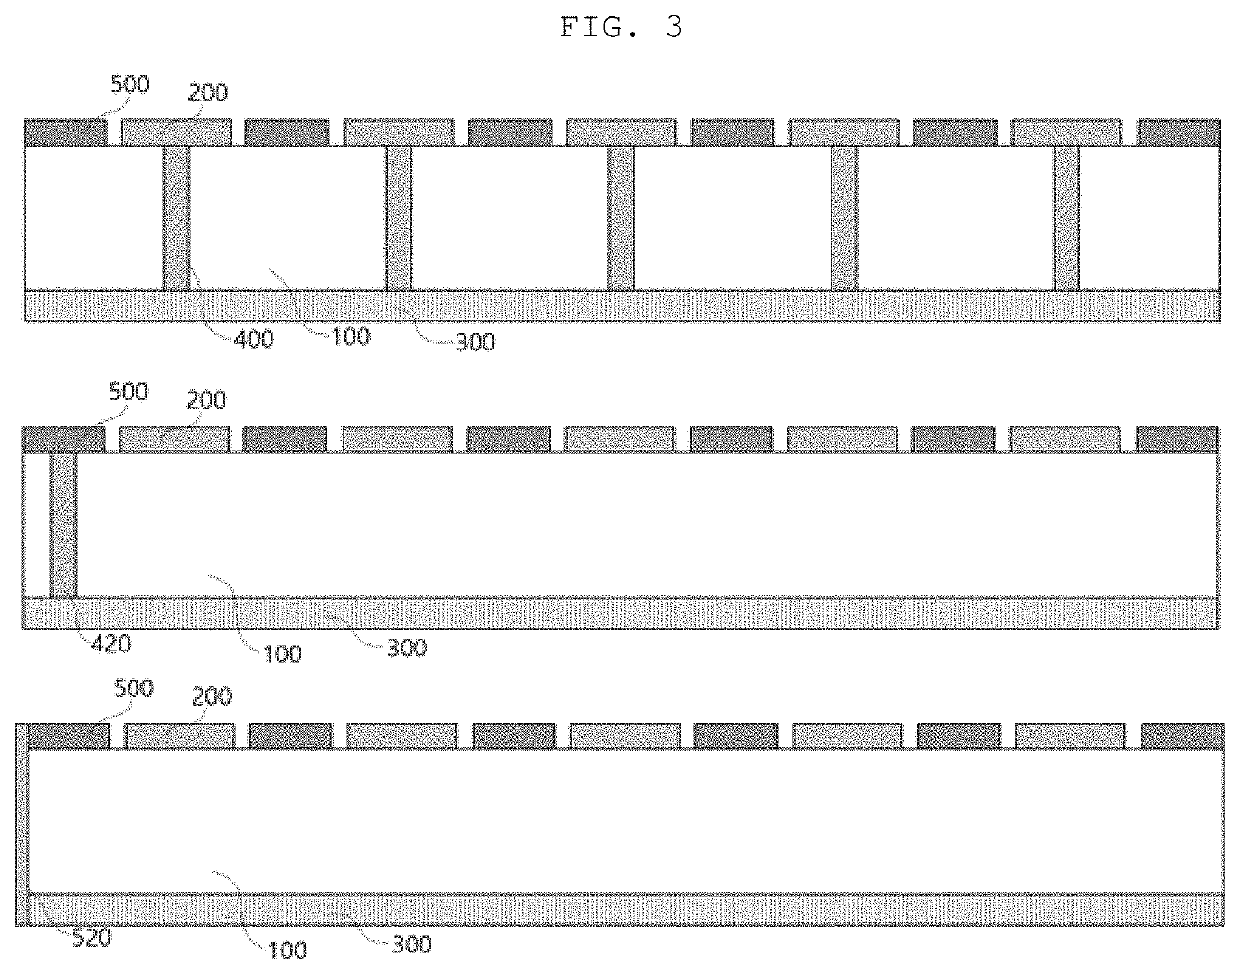 Sample Plate for Maldi Mass Spectrometry and Manufacturing Method Therefor